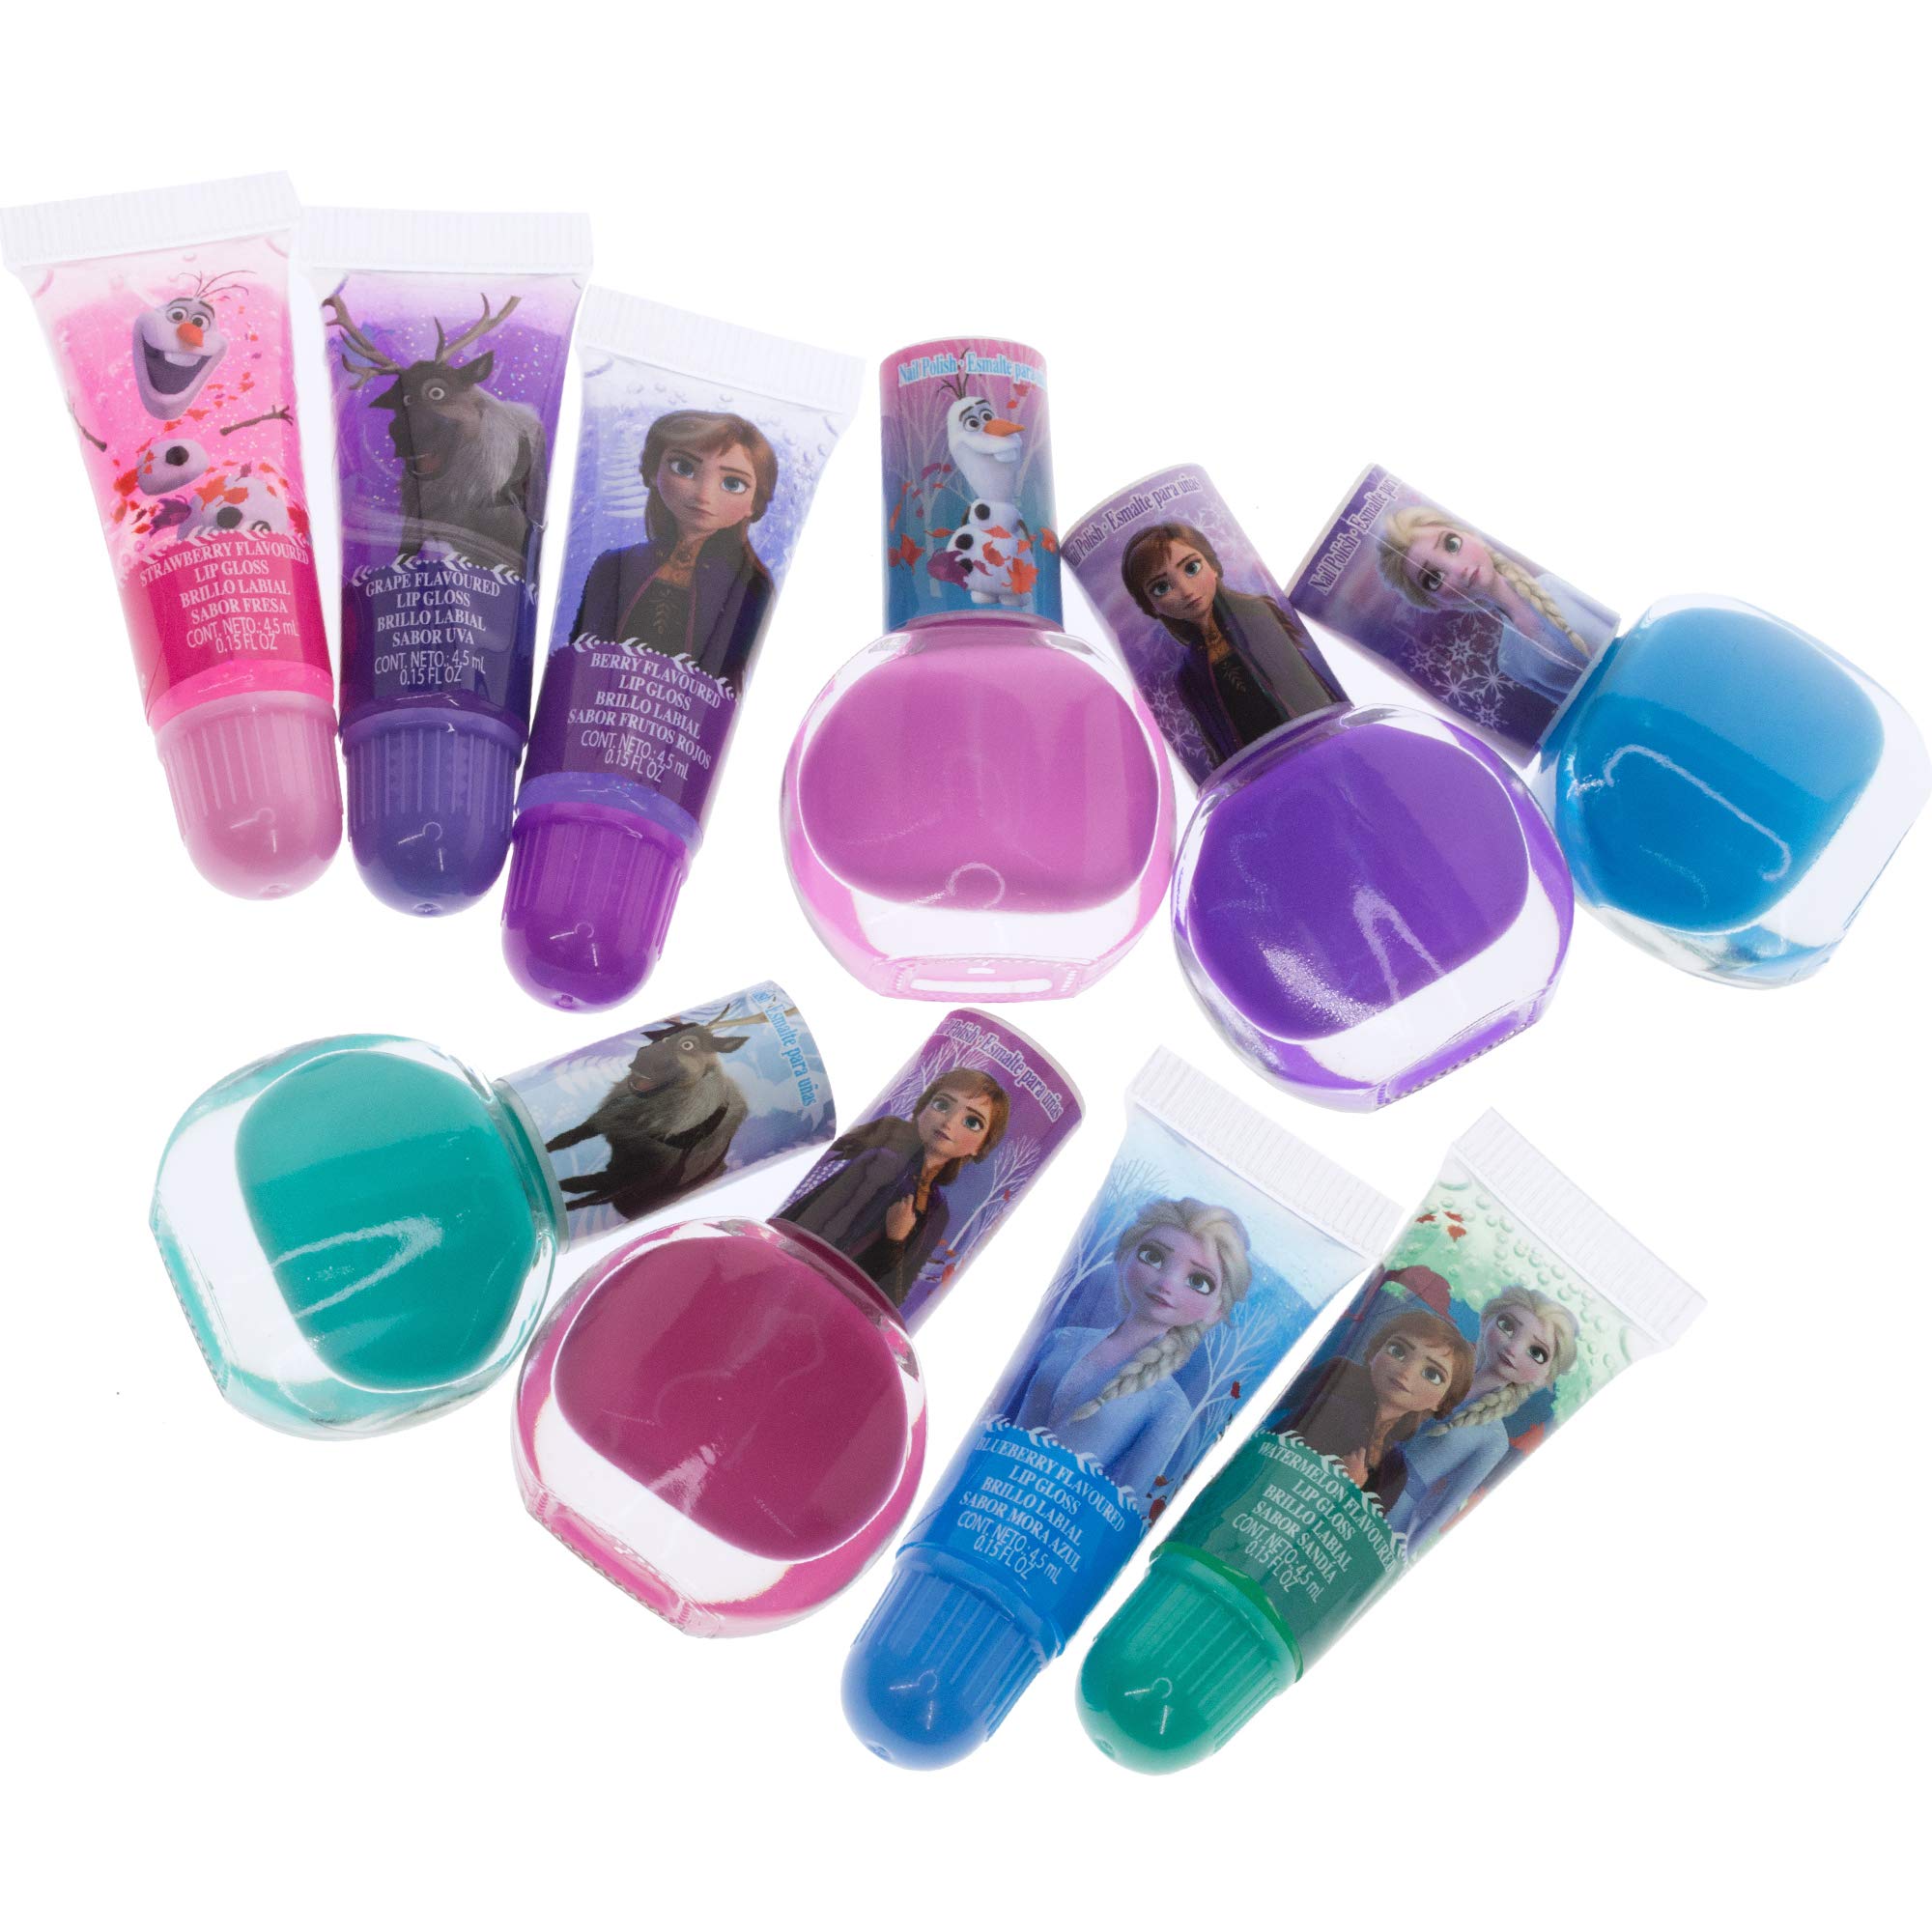 Disney Frozen Elsa Anna Nail Polish Cosmetic Makeup Set for Girls with Lip Gloss Nail Polish Nail Stickers - 11 Pcs| Parties ,Sleepovers Makeovers| Birthday Gift for Girls 3 Yrs+